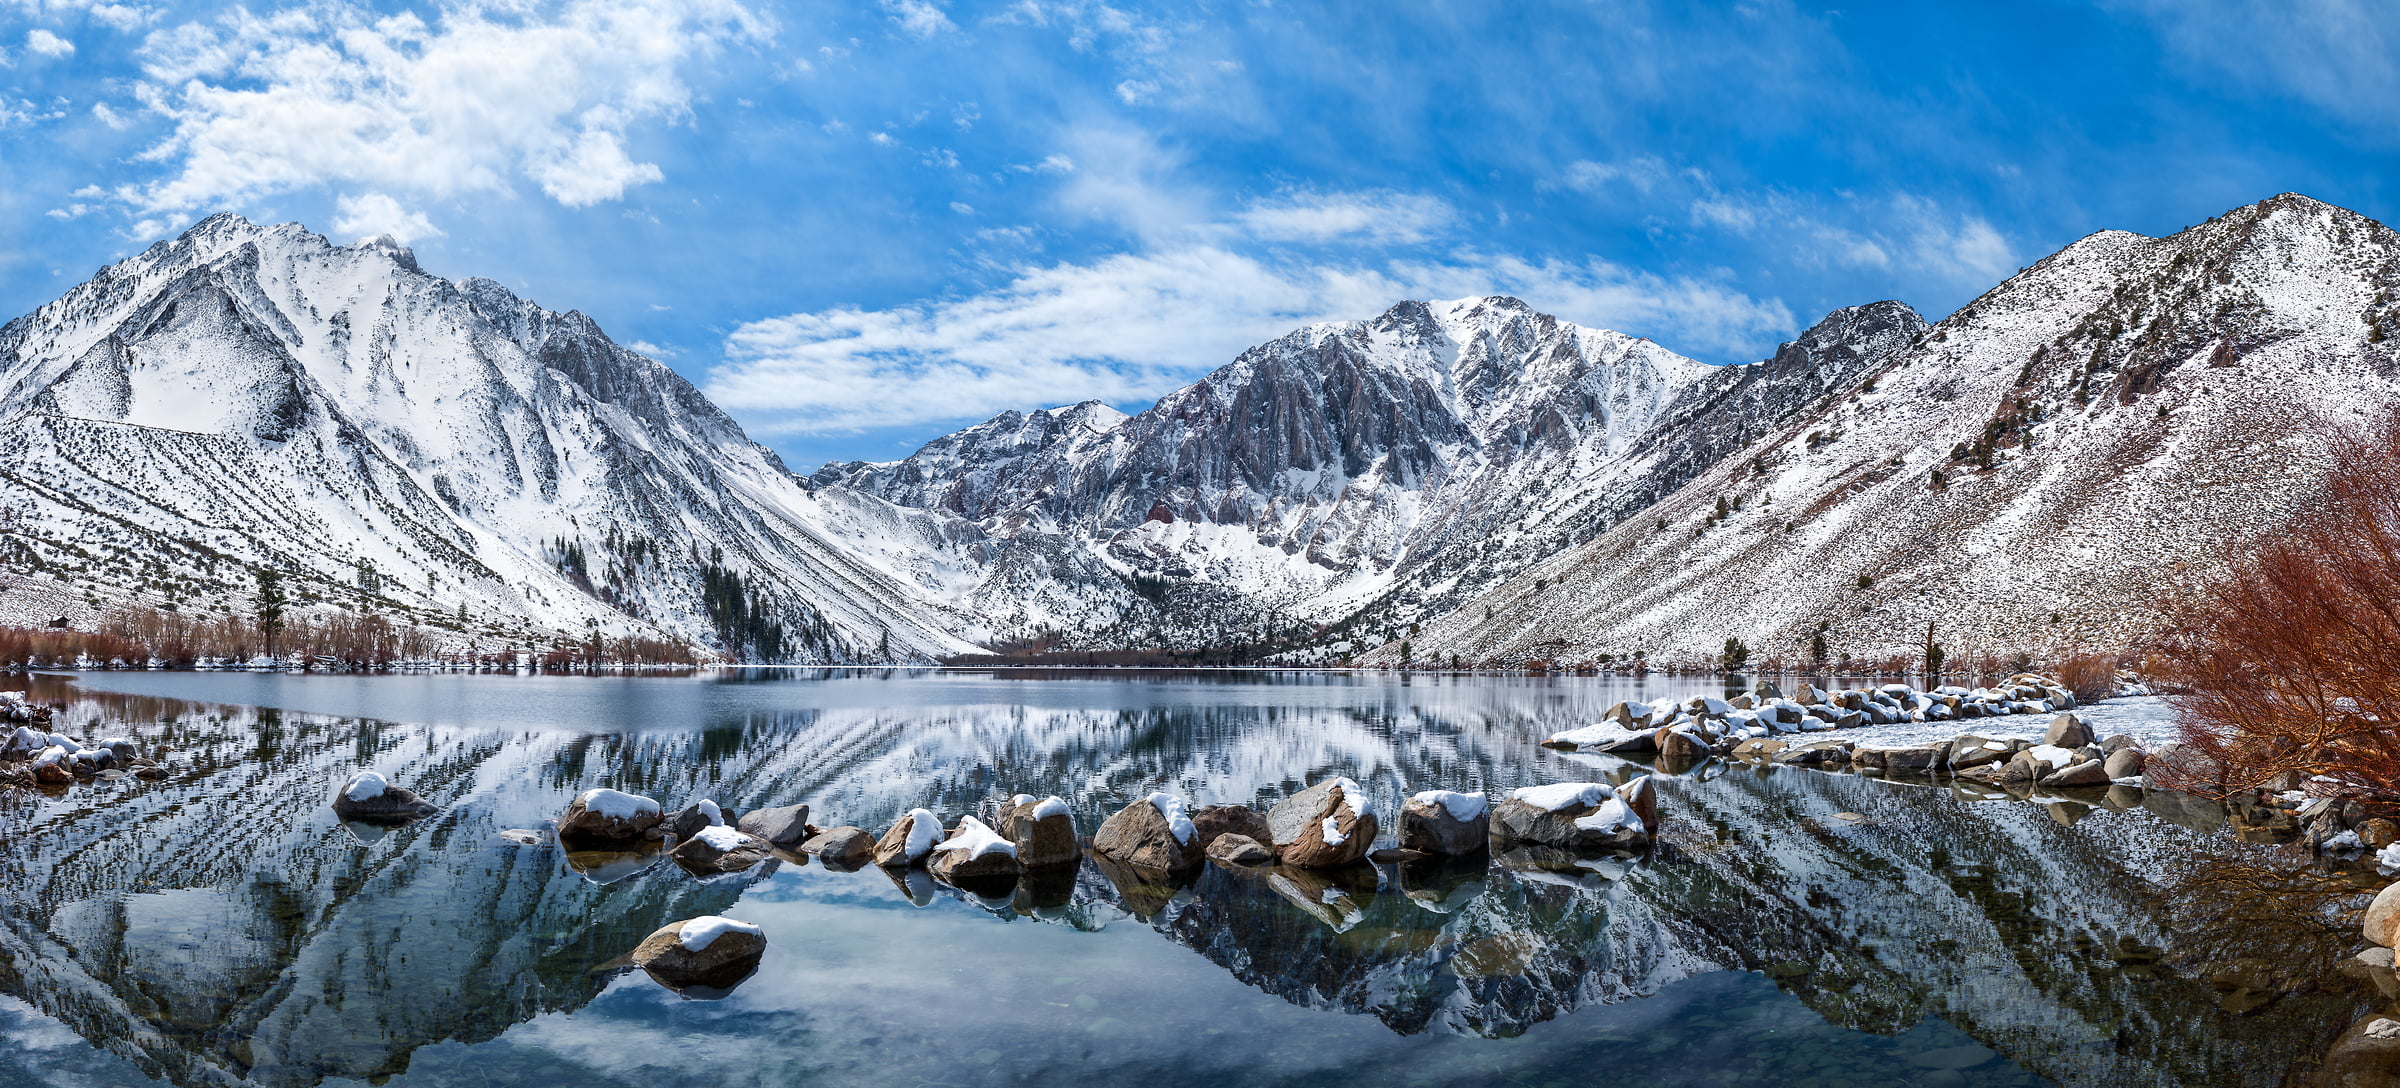 649 megapixels! A very high resolution, large-format VAST photo of mountains with snow and an alpine lake in winter; landscape photograph created by Jim Tarpo in Mono County, California